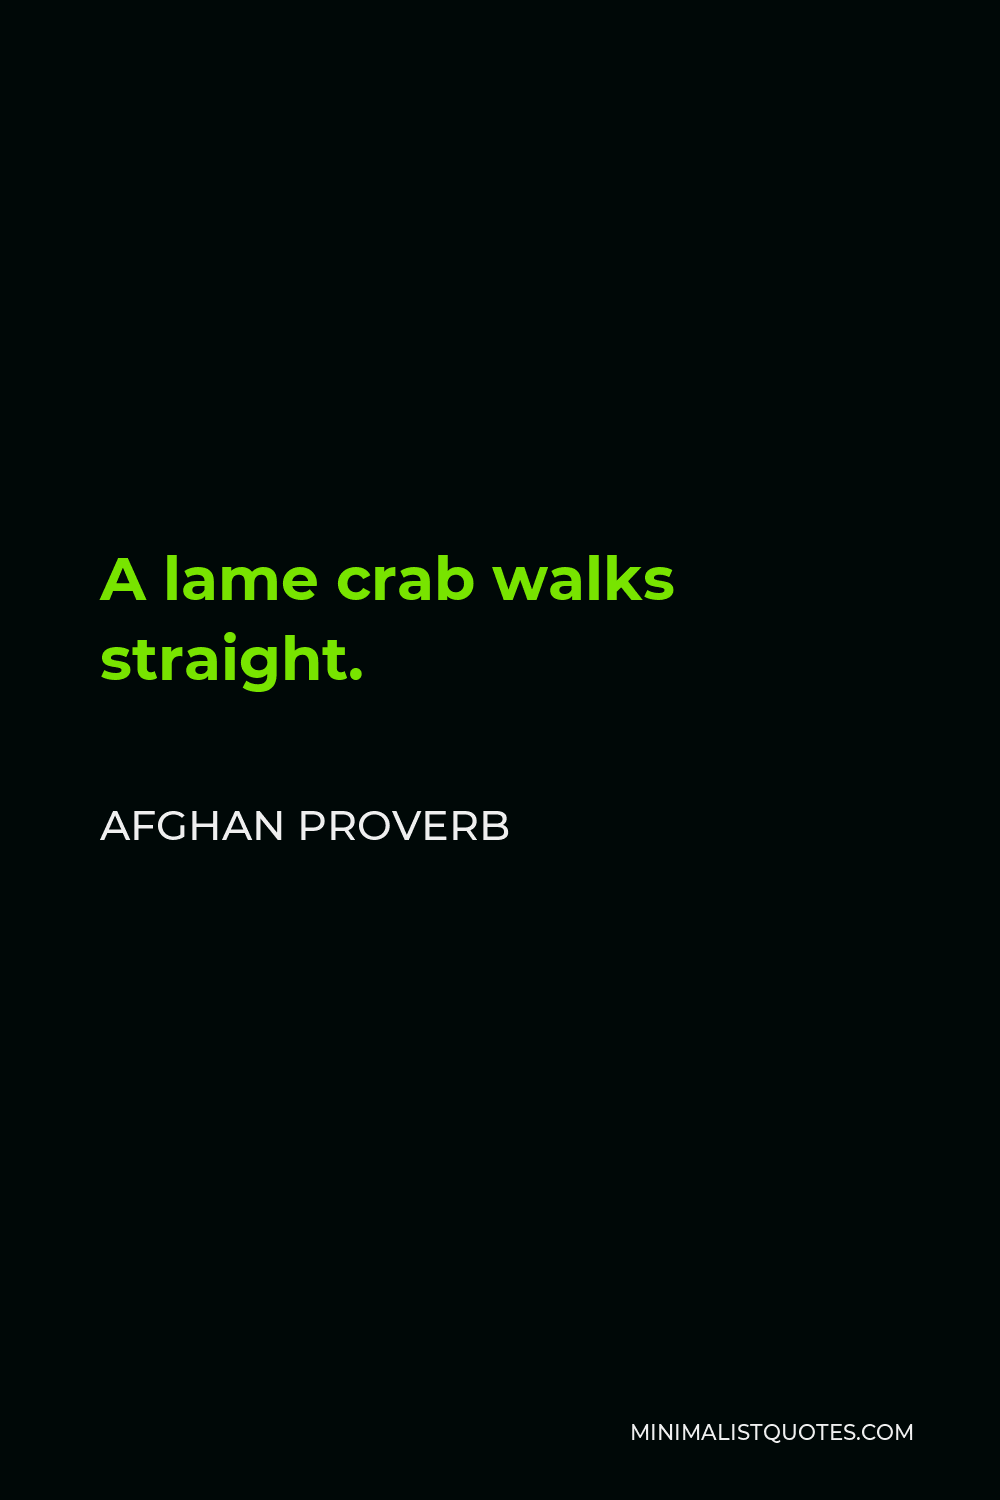 Afghan Proverb Quote - A lame crab walks straight.